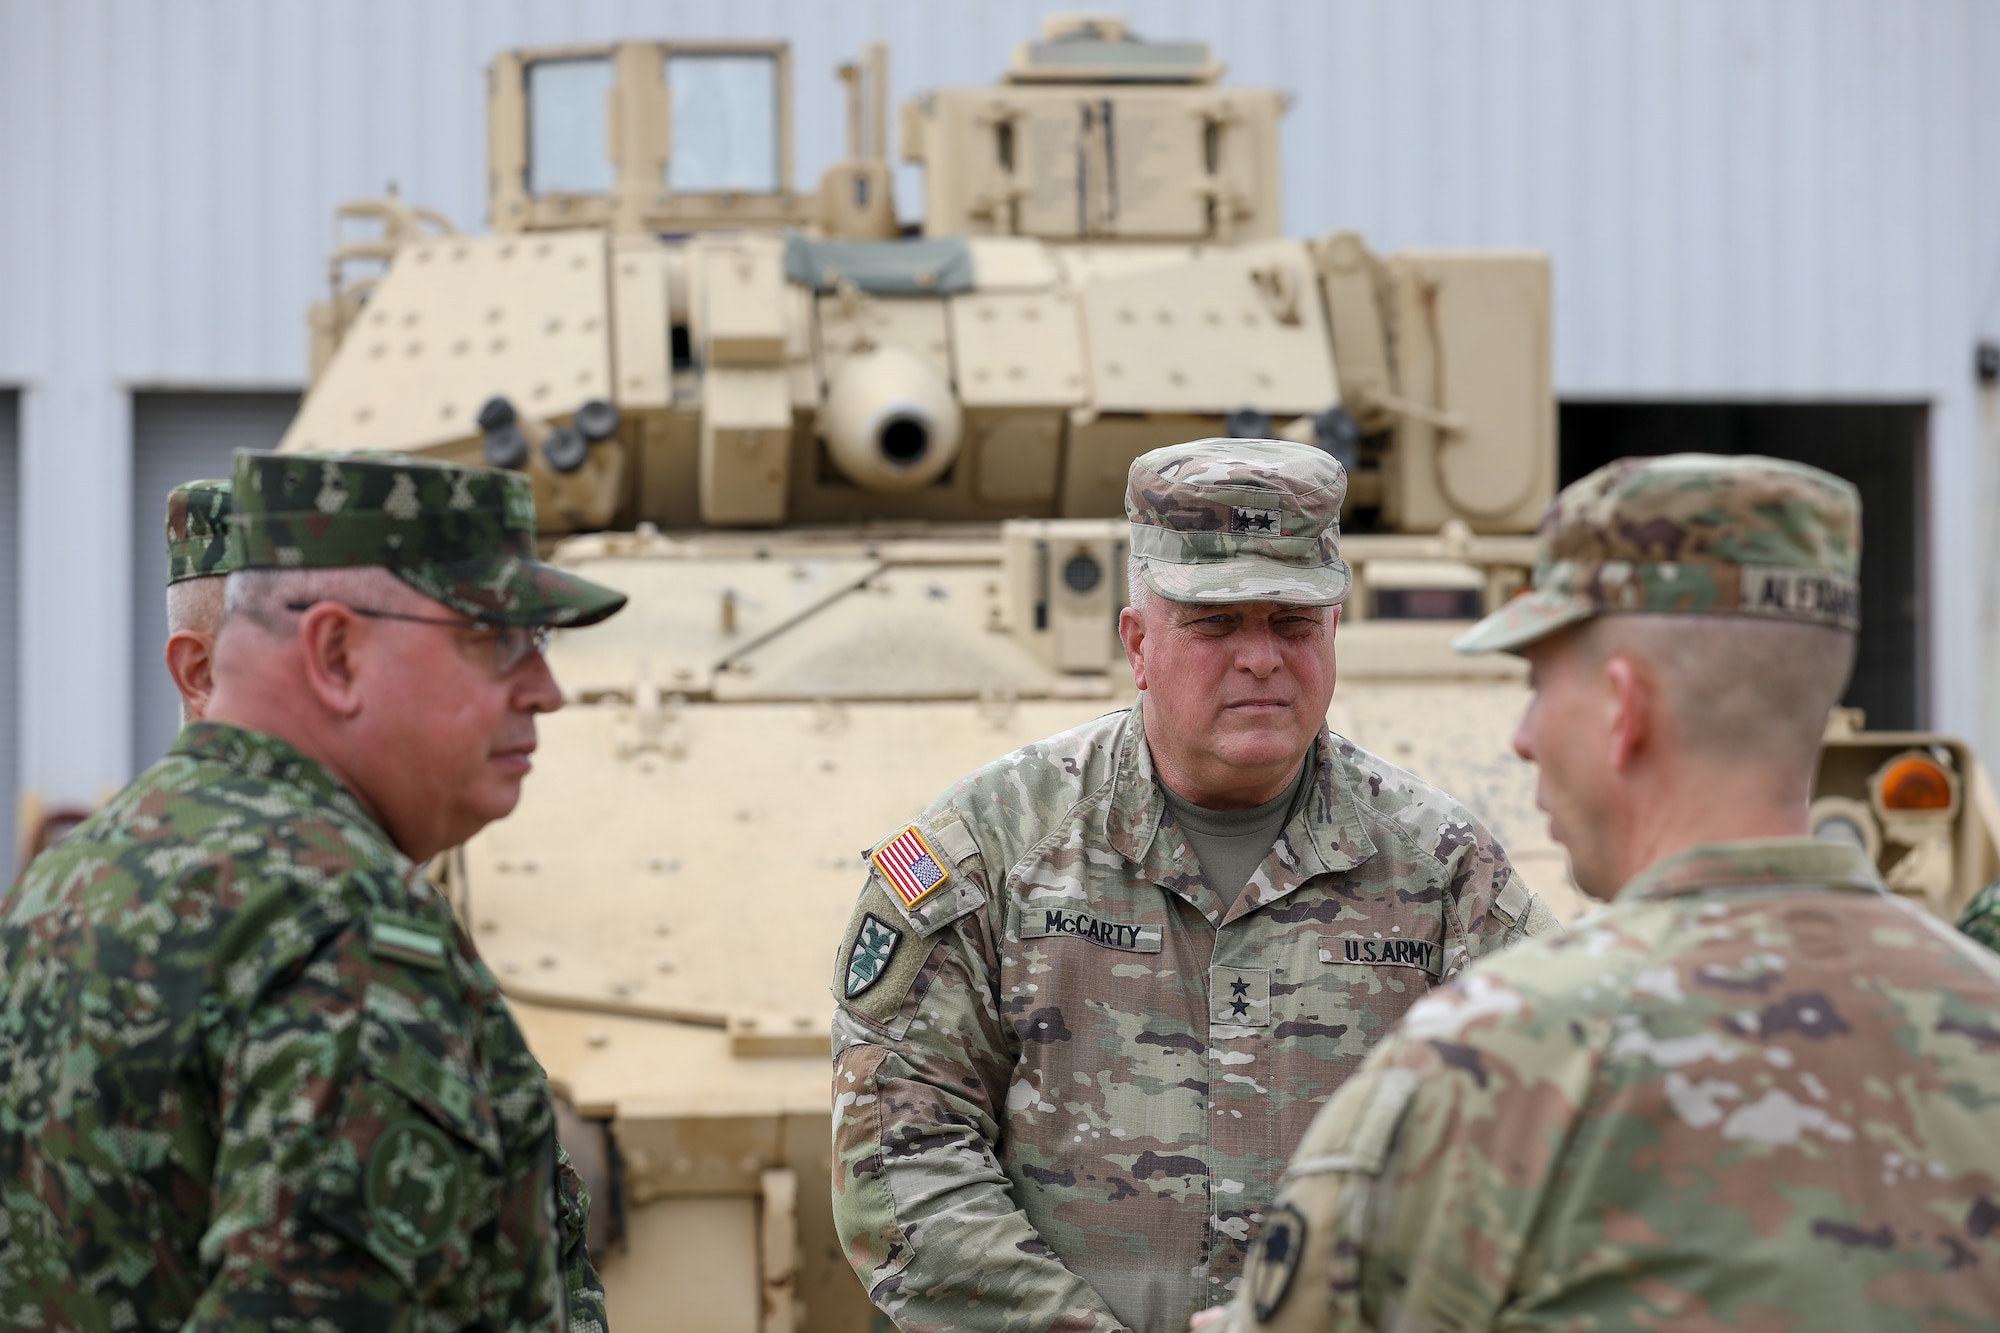 Airmen talk to each other in front of a tank